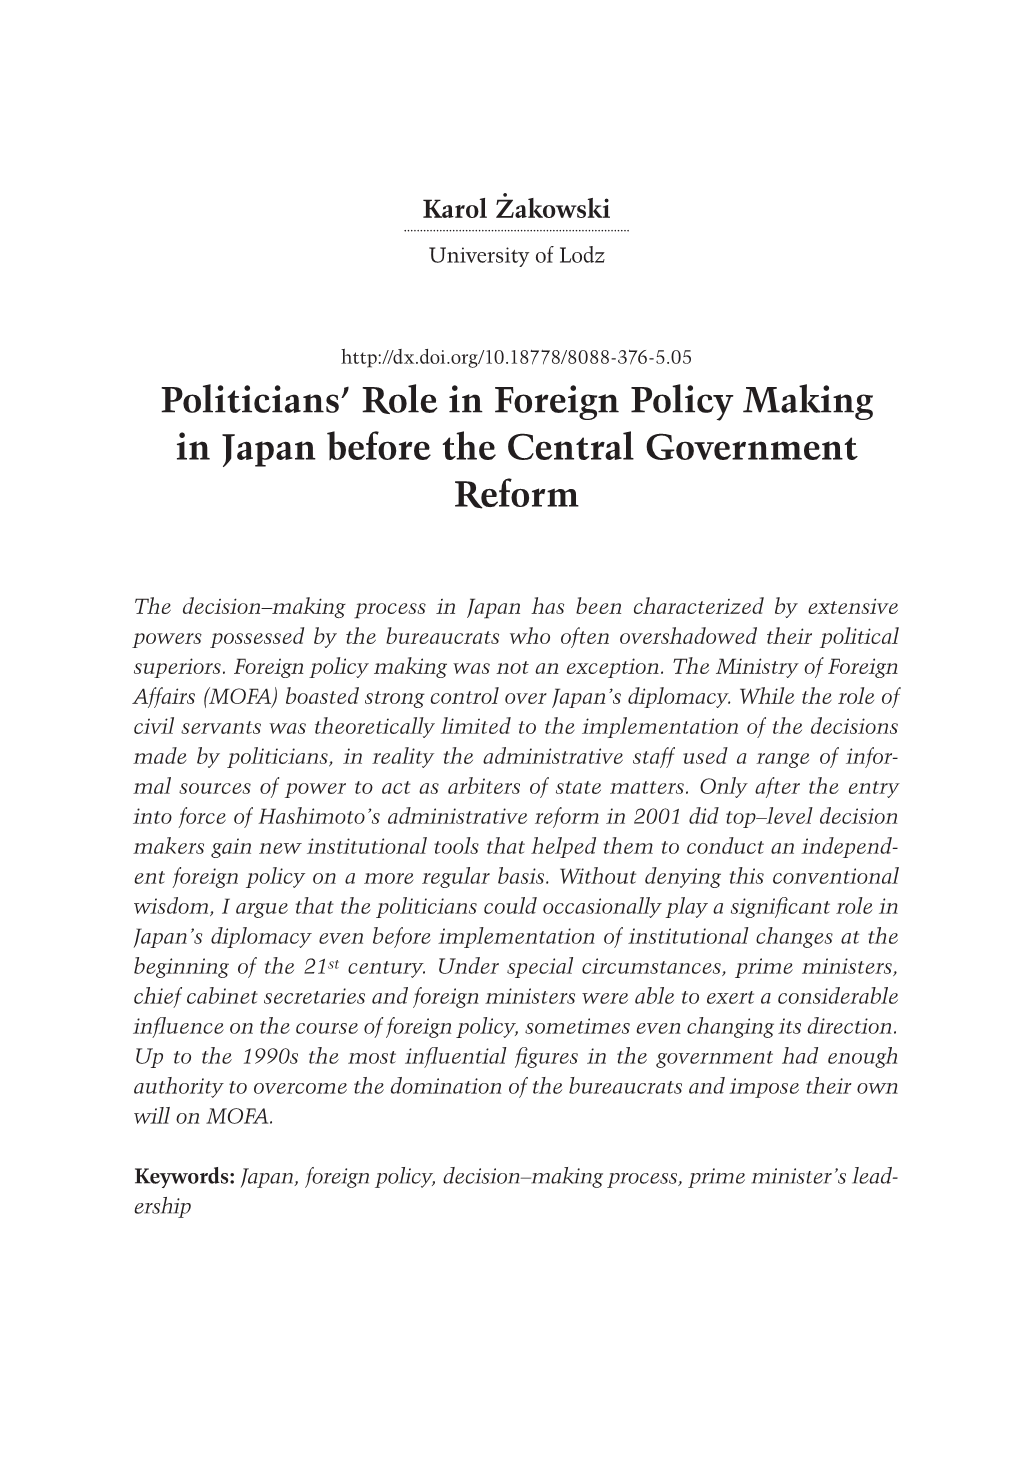 Politicians' Role in Foreign Policy Making in Japan Before the Central